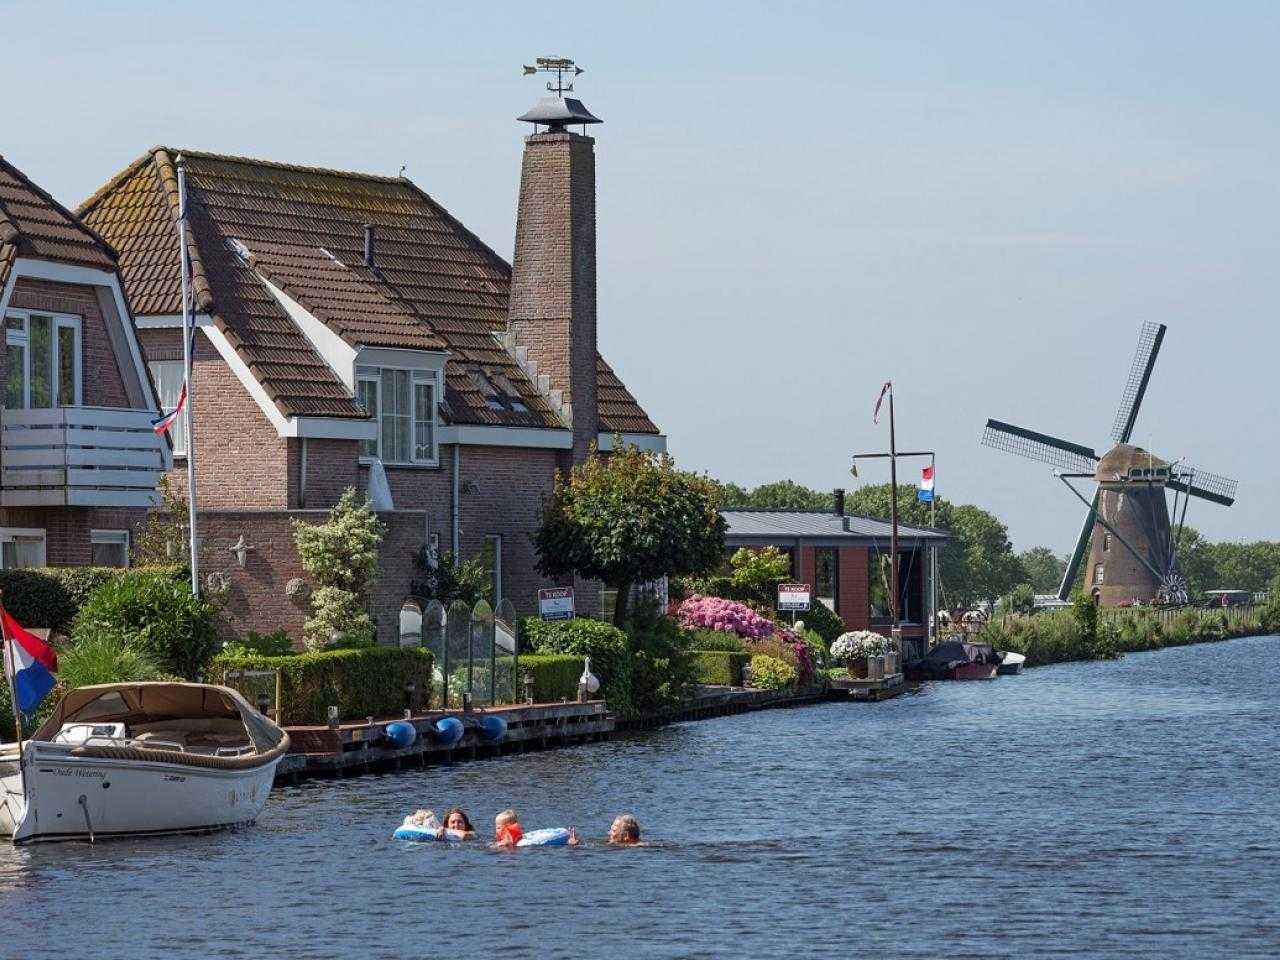 View of Oude Wetering from the Ringvaart.